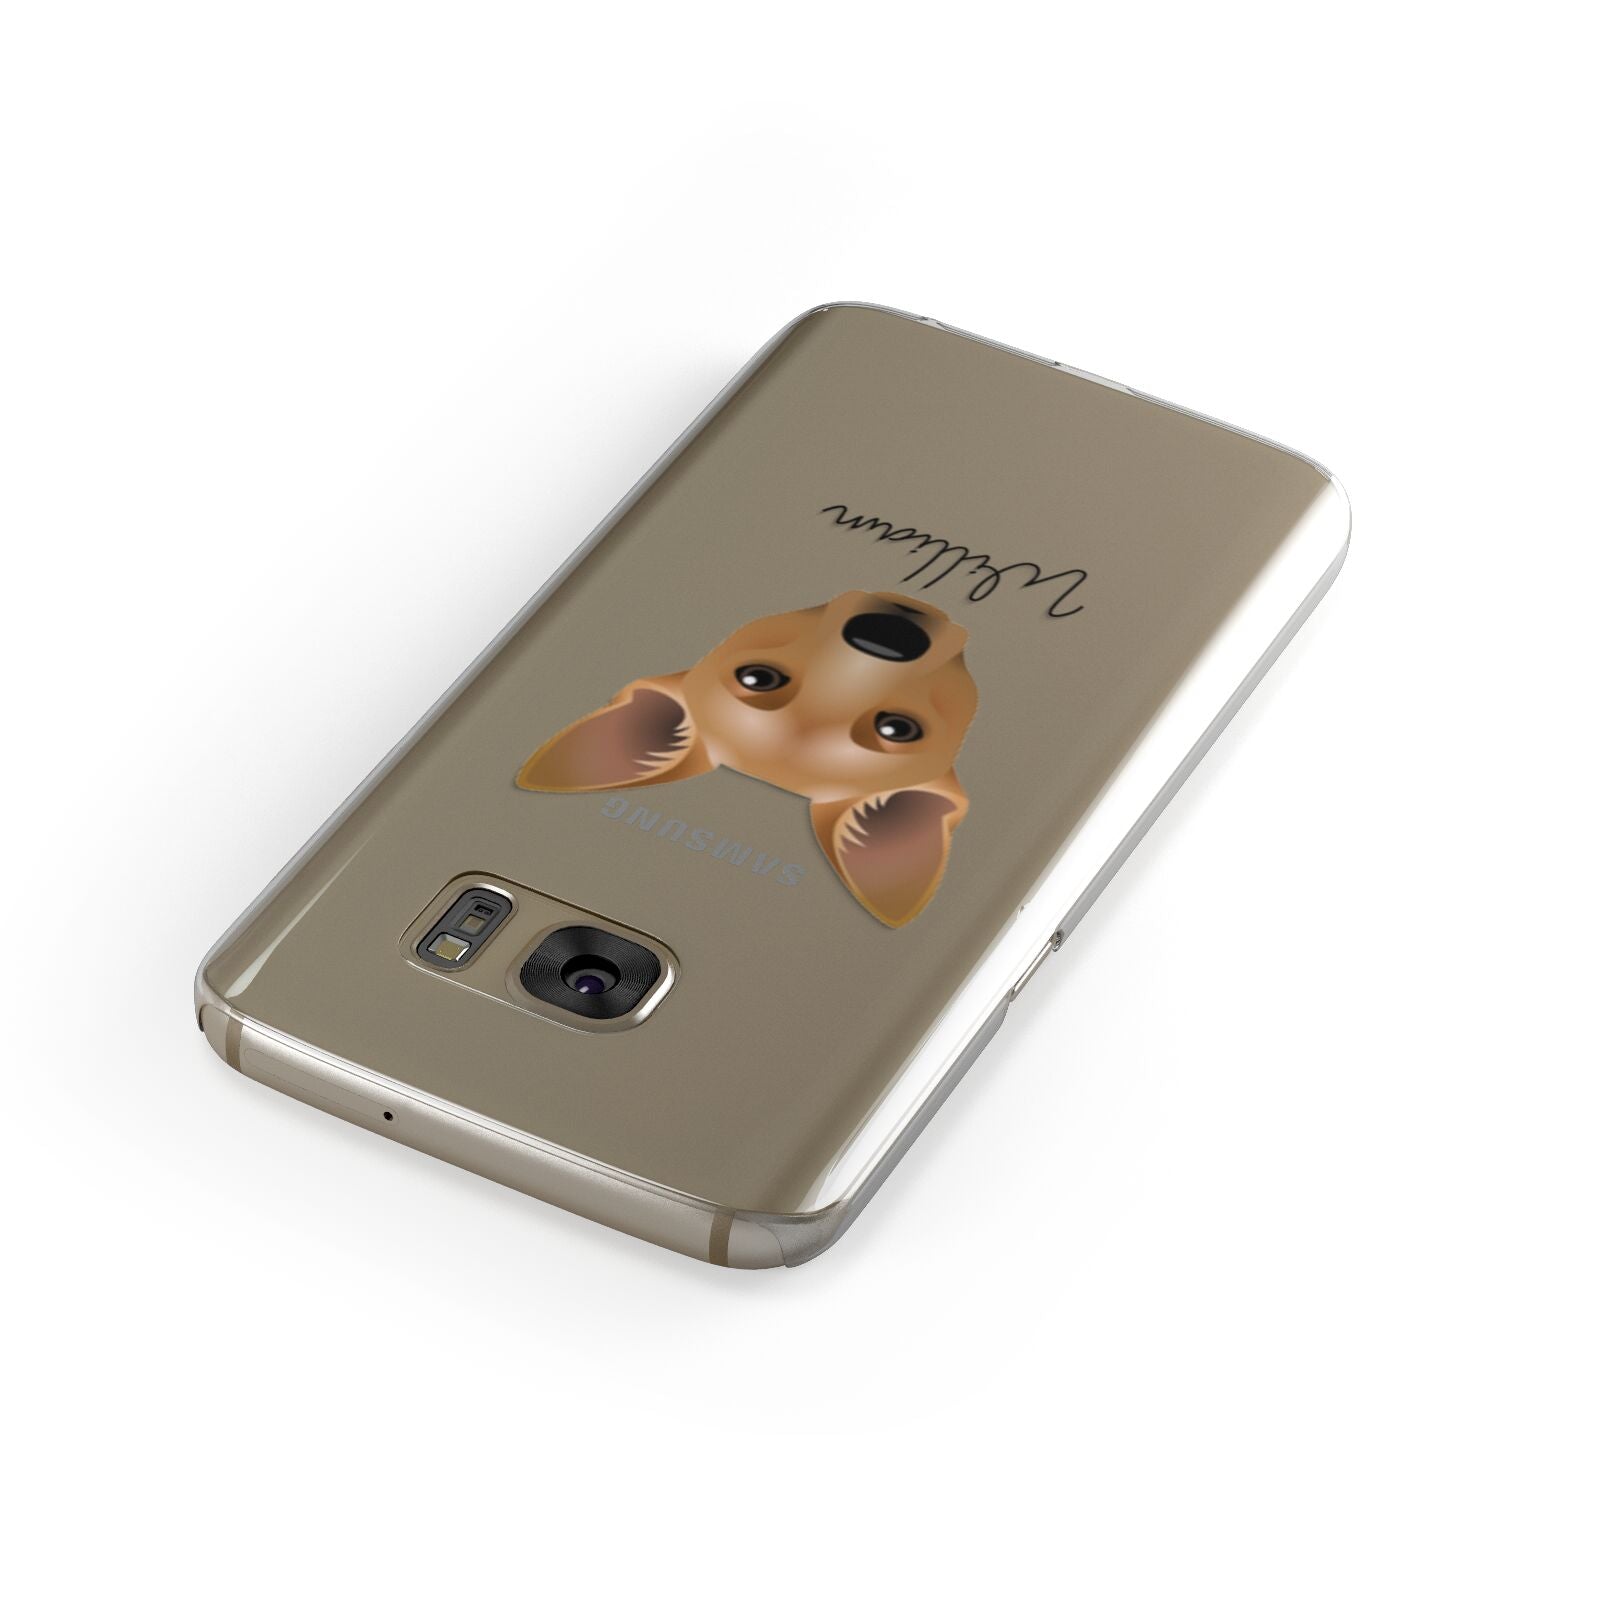 Cojack Personalised Samsung Galaxy Case Front Close Up